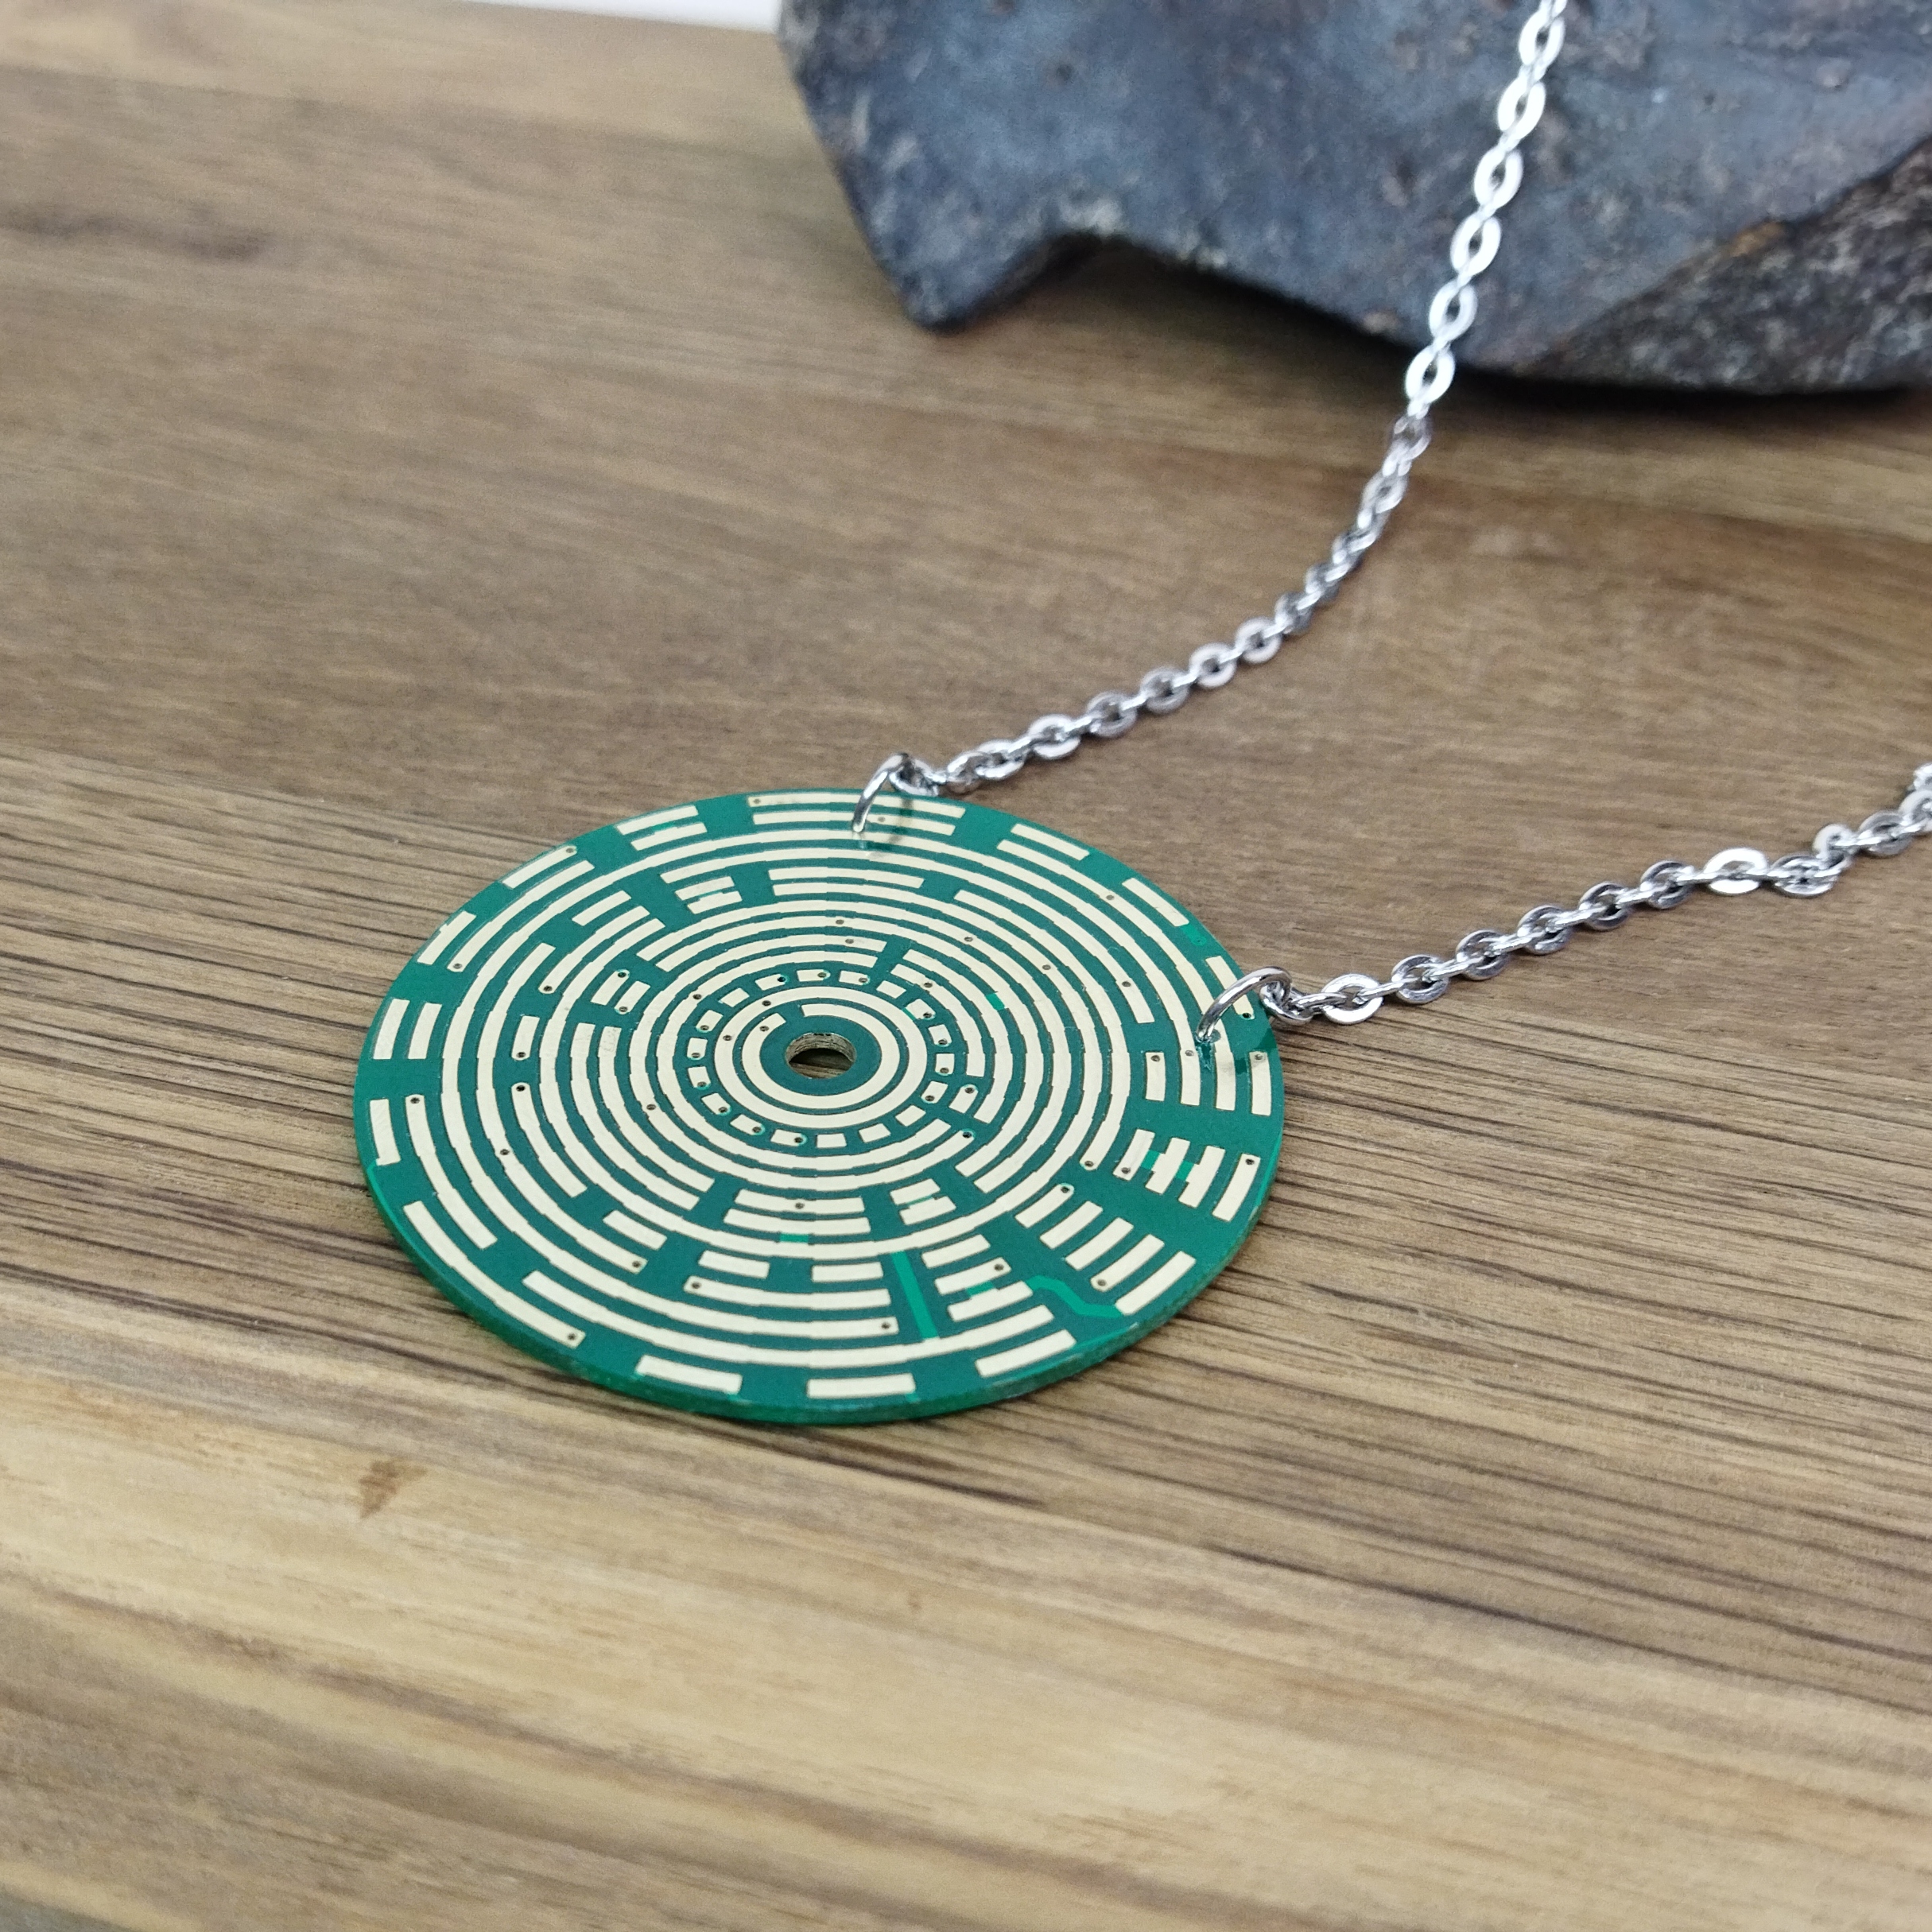 Circuit board pendant with chain Cyberpunk necklace for men